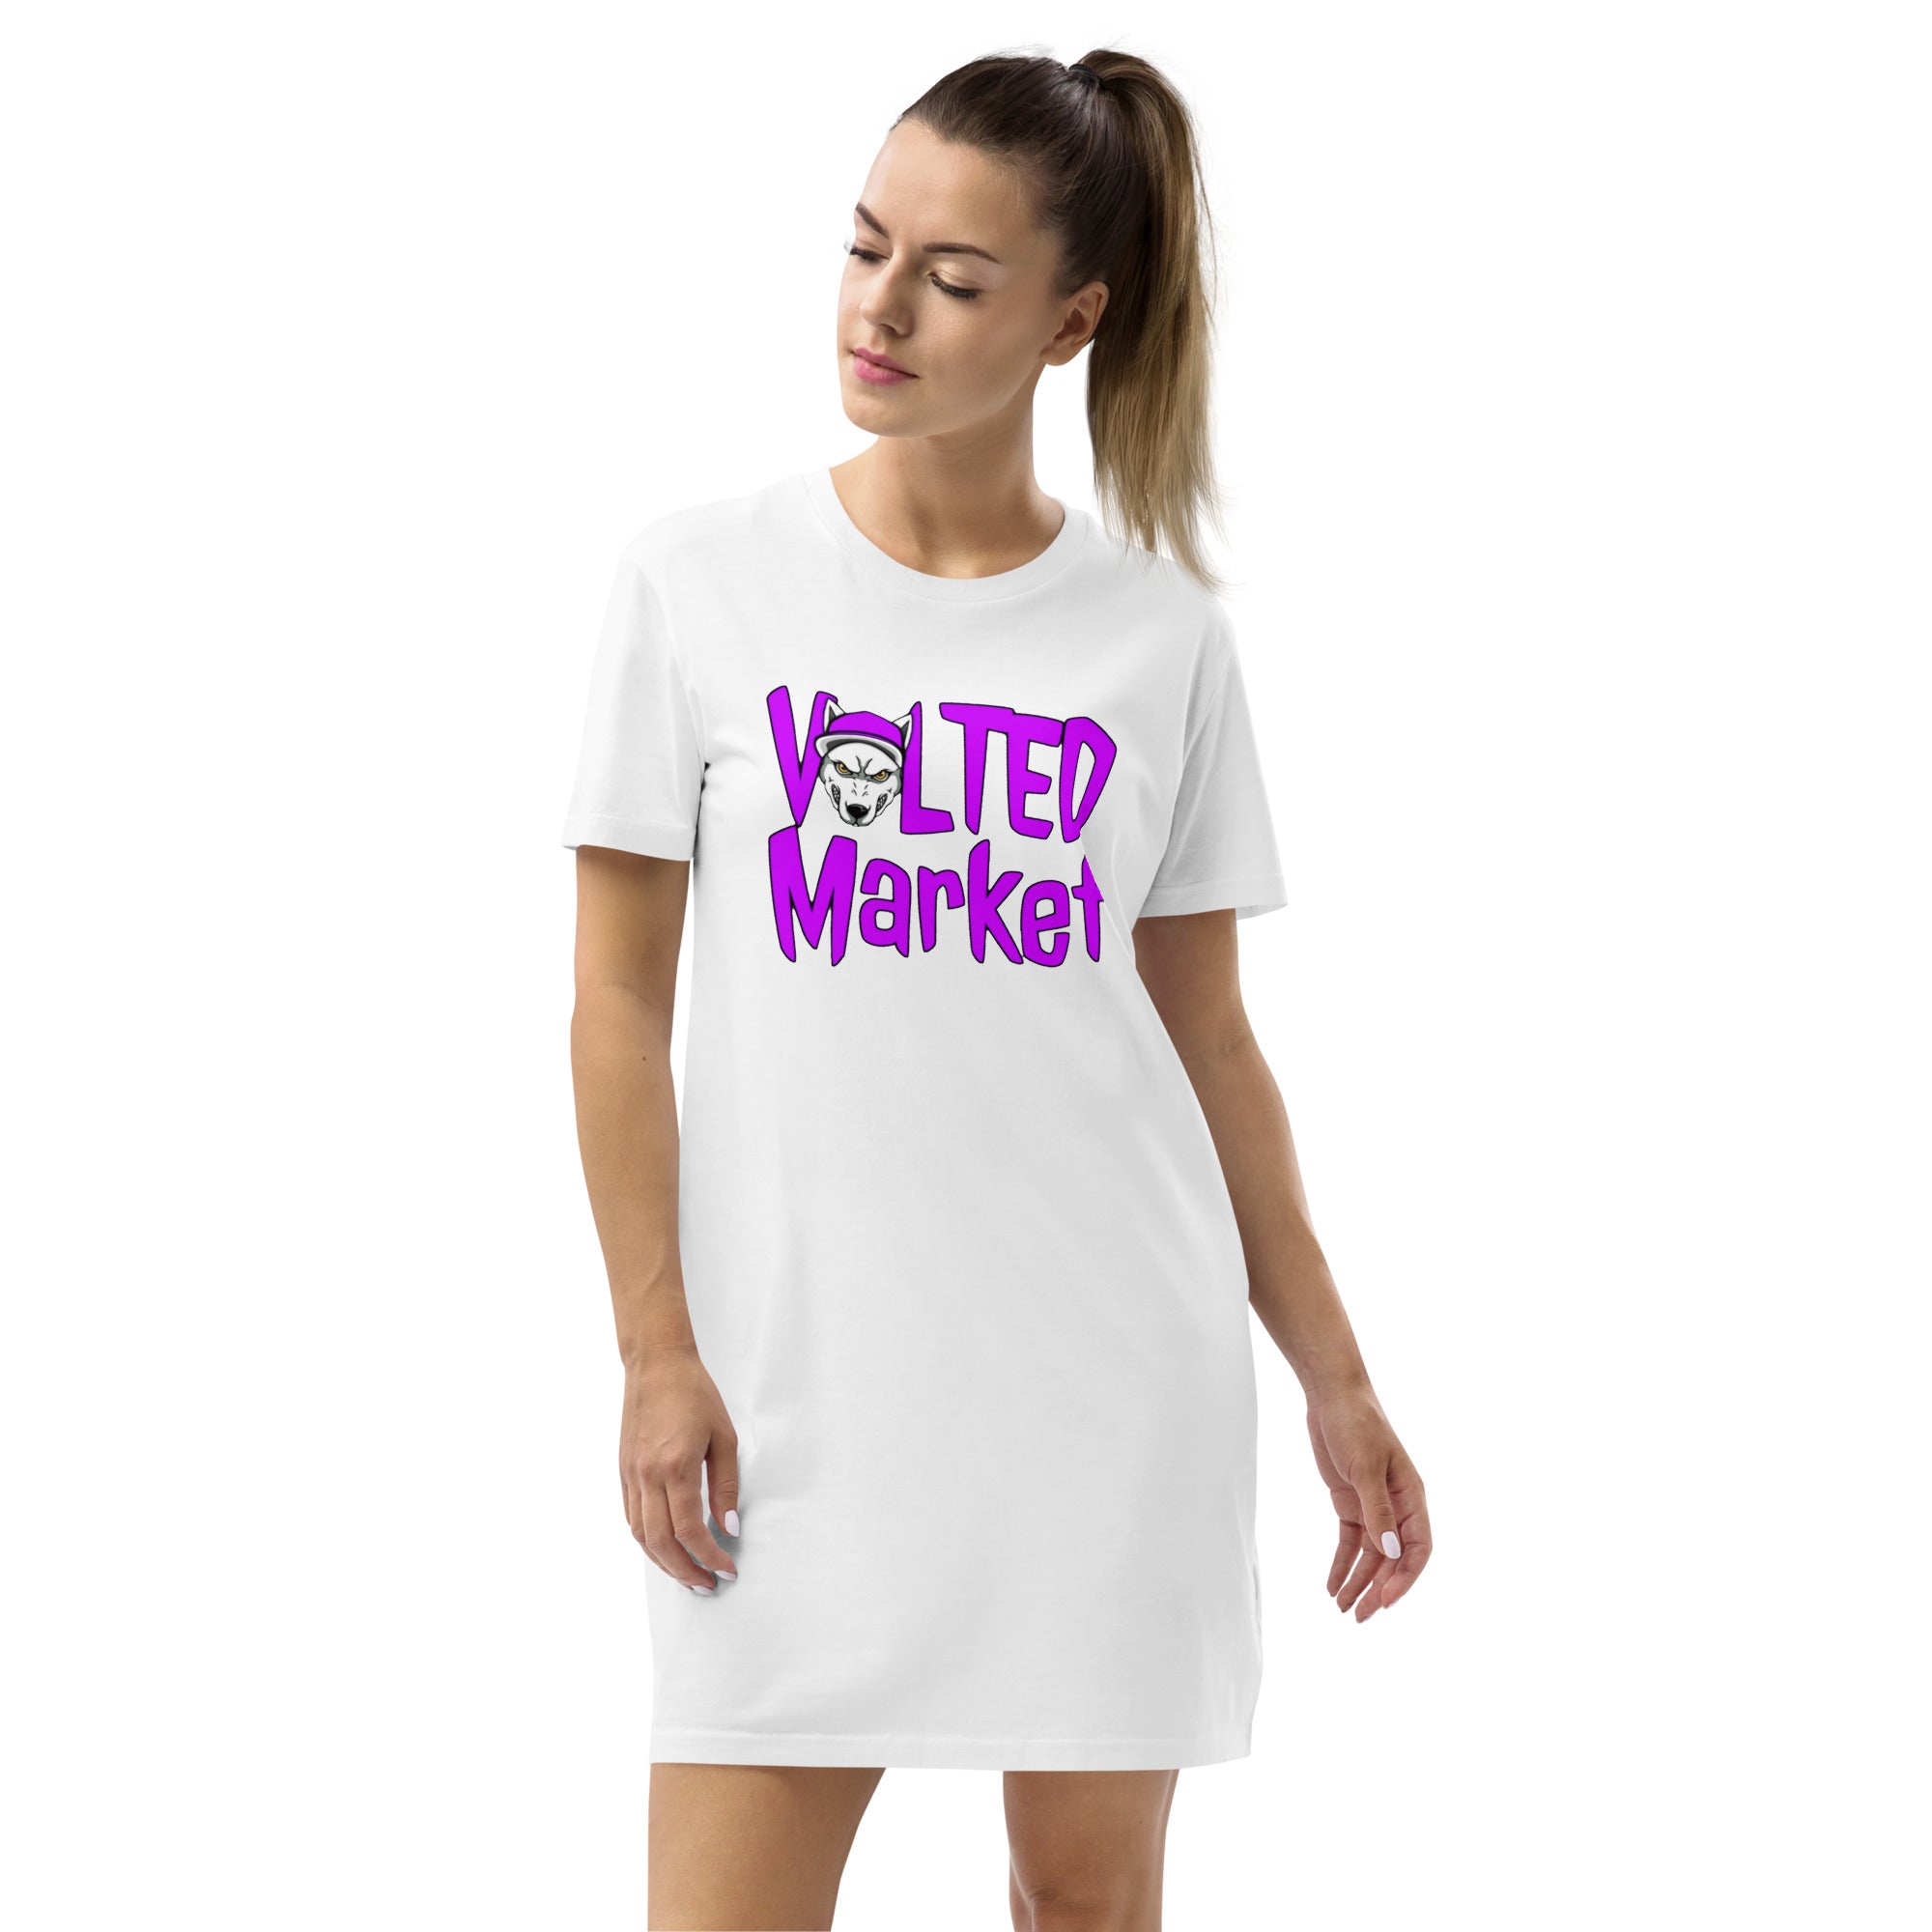 Volted Market Tshirt Dress⚡️NFTees - NFTees365